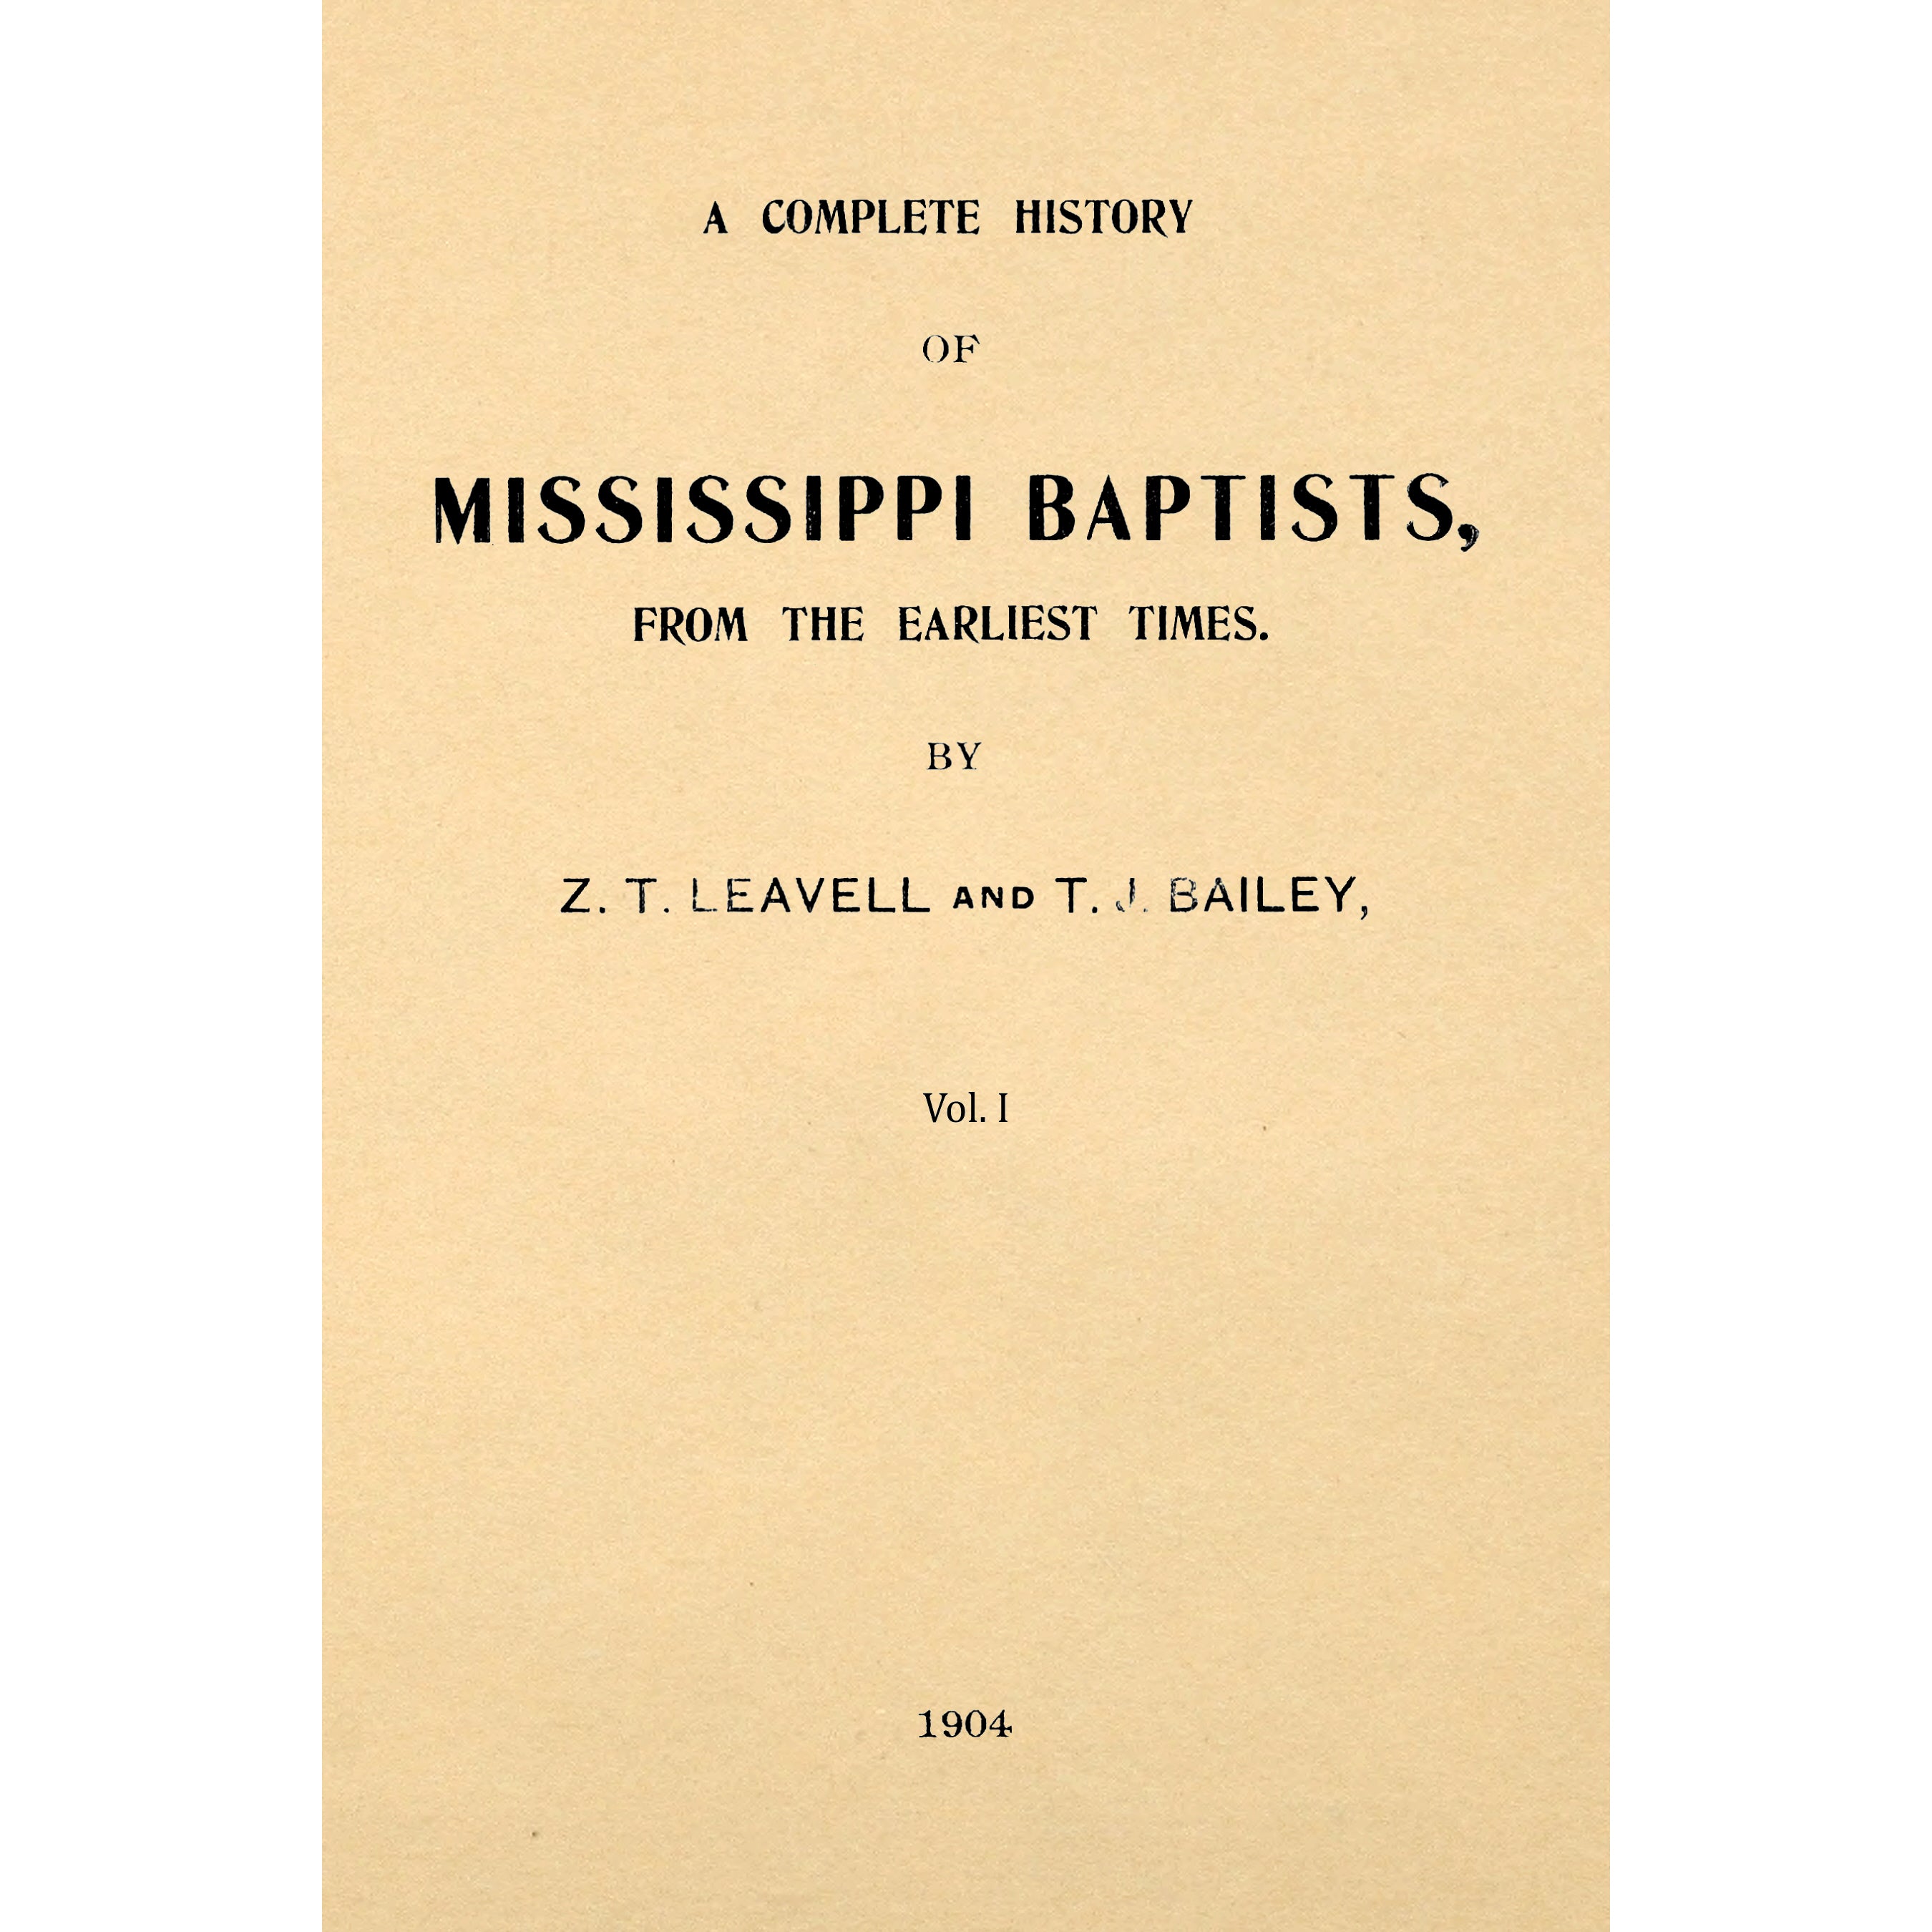 A complete history of Mississippi Baptists in 2 Volumes